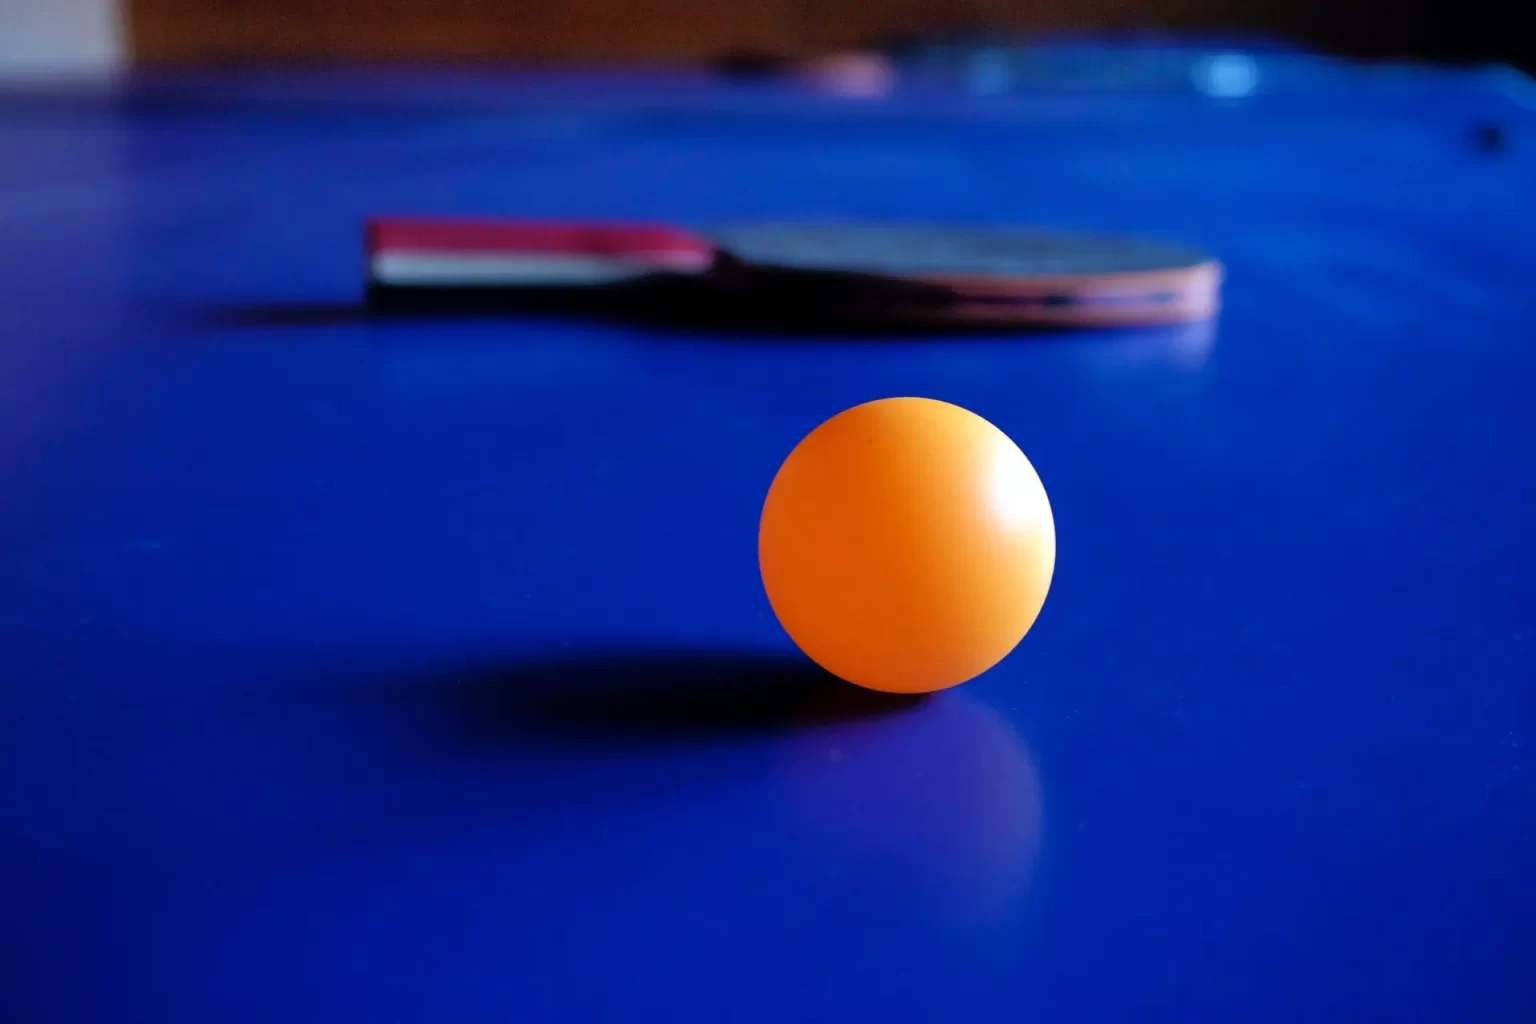 Learn more about table tennis roznama pakistan